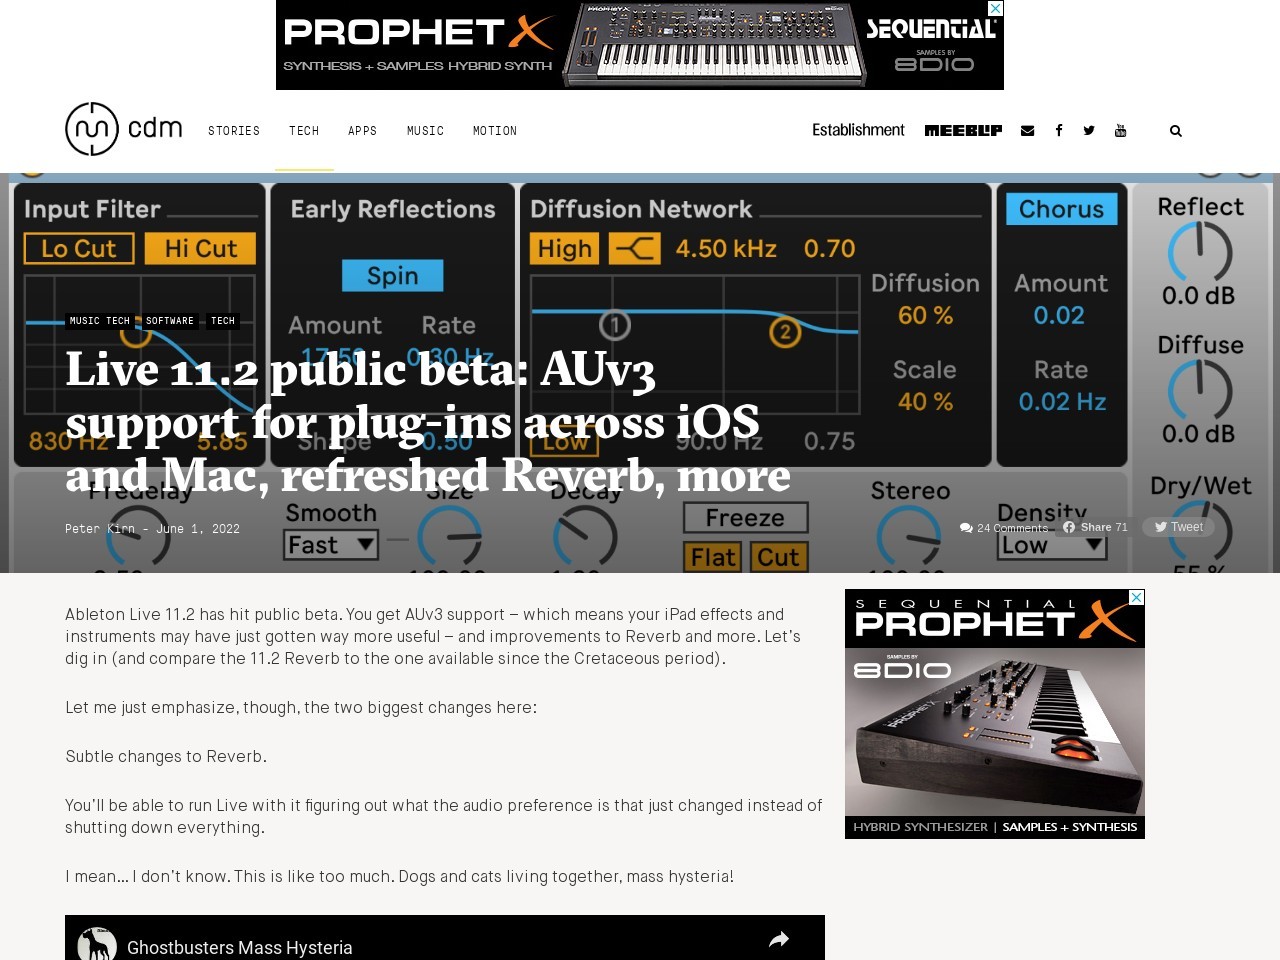 Live 11.2 public beta: AUv3 support for plug-ins across iOS and Mac, refreshed Reverb, more - CDM Create Digital Music